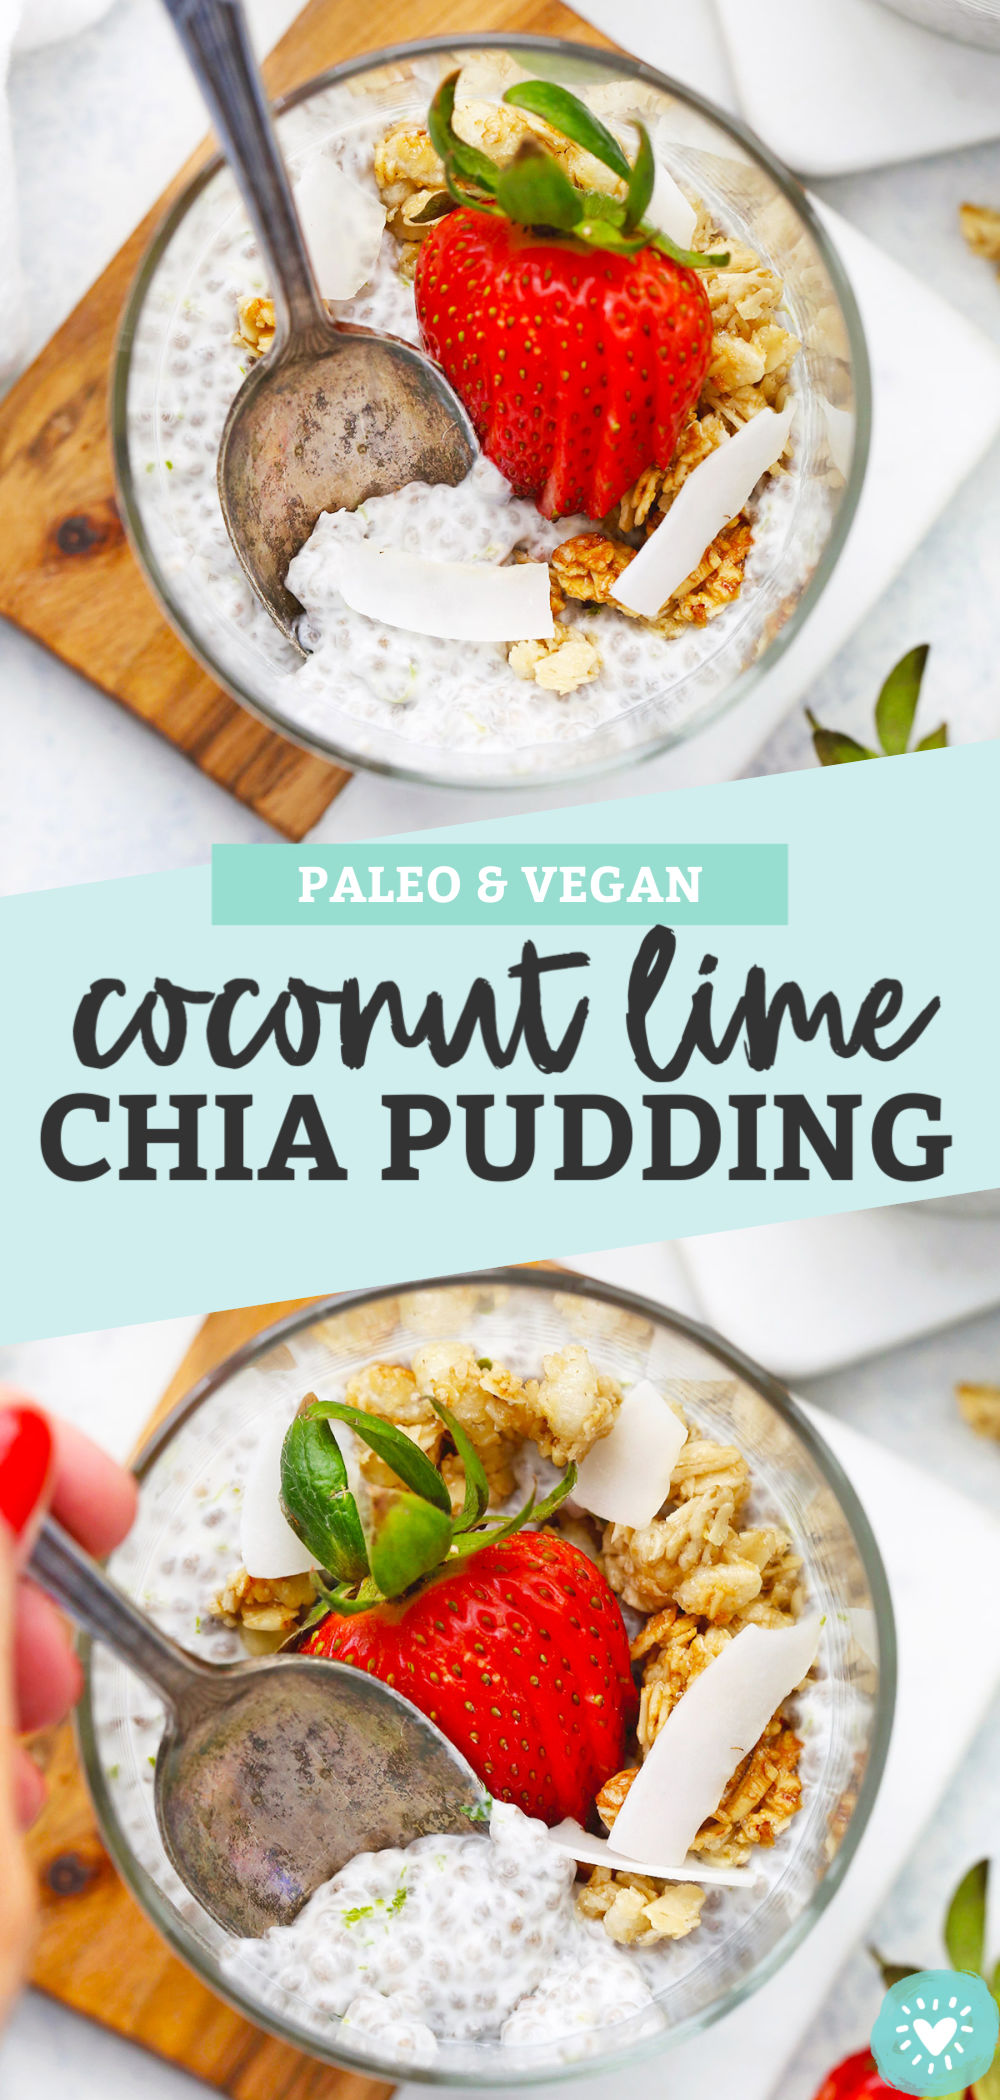 Coconut Lime Chia Pudding from One Lovely Life